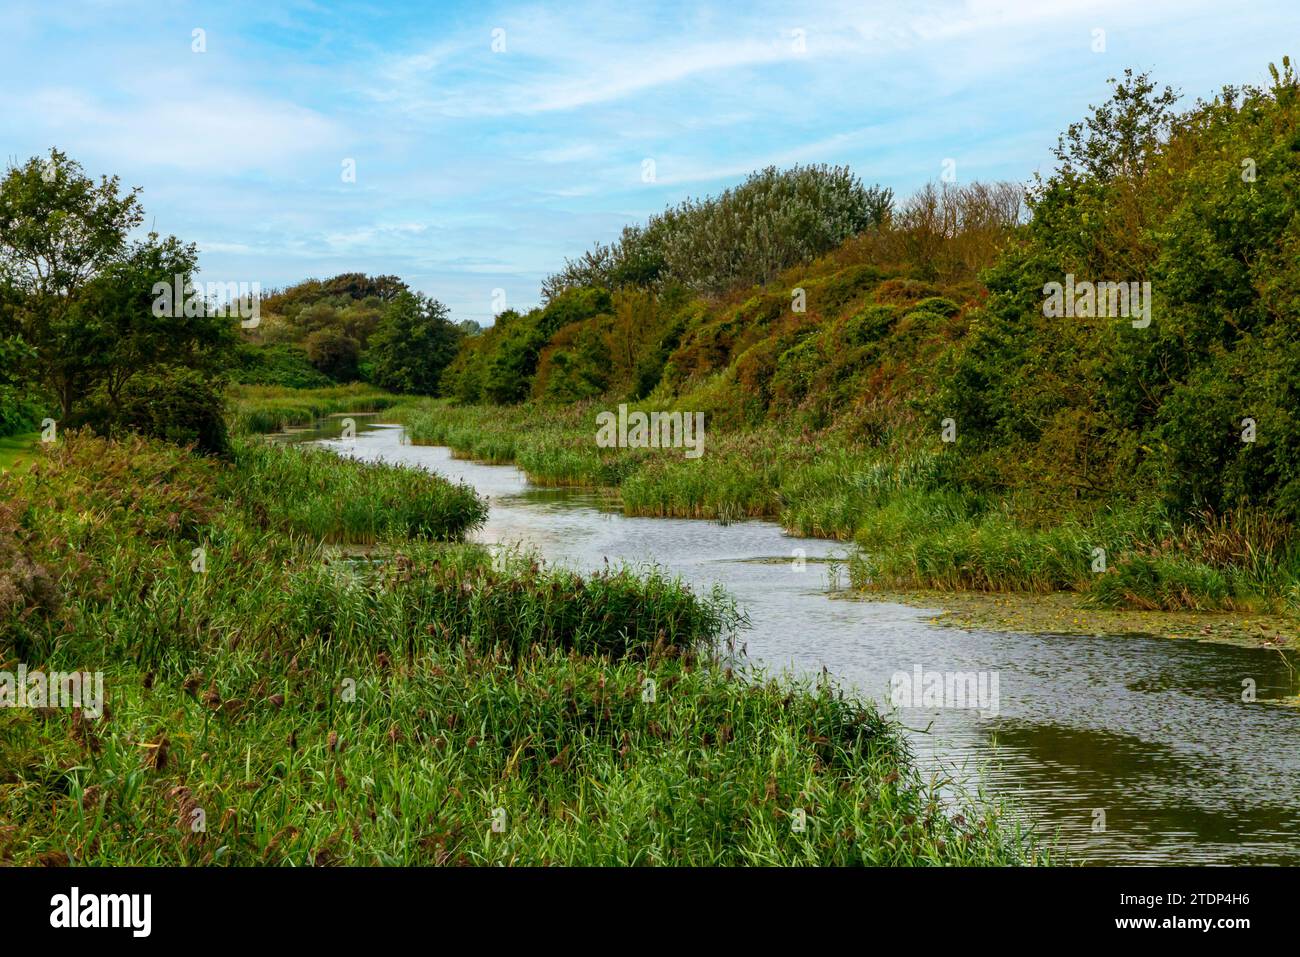 The Royal Military Canal at Sandgate near Hythe in Kent England UK opened in 1809 as a defensive waterway during the Napoleonic wars. Stock Photo